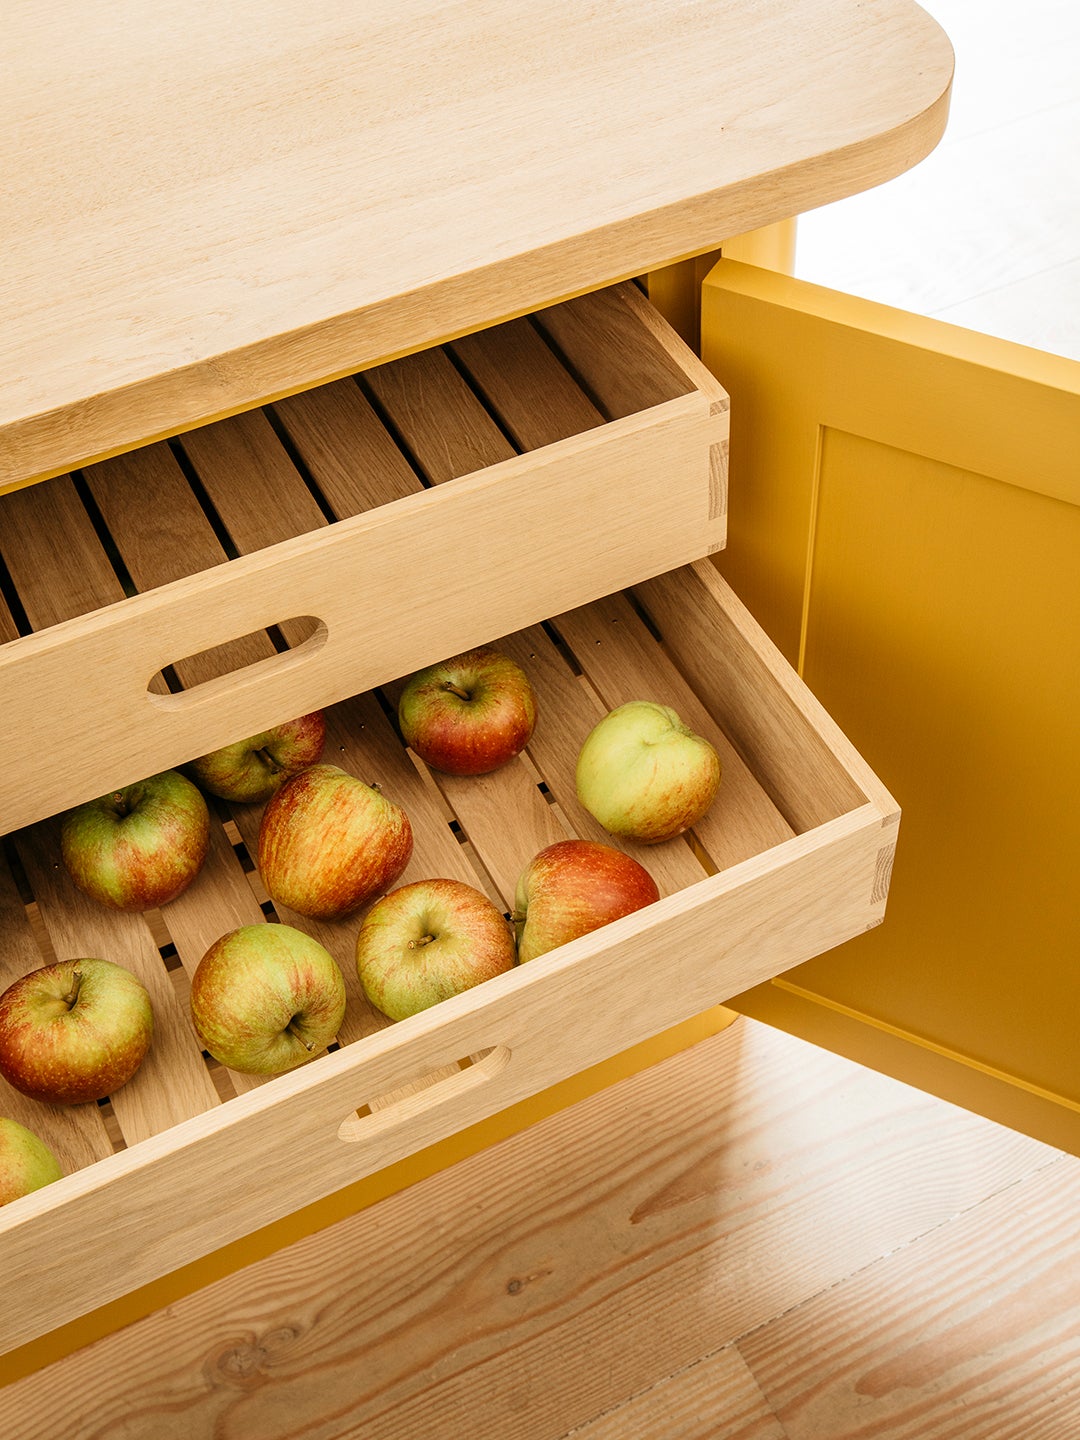 slatted drawers for fruit storage